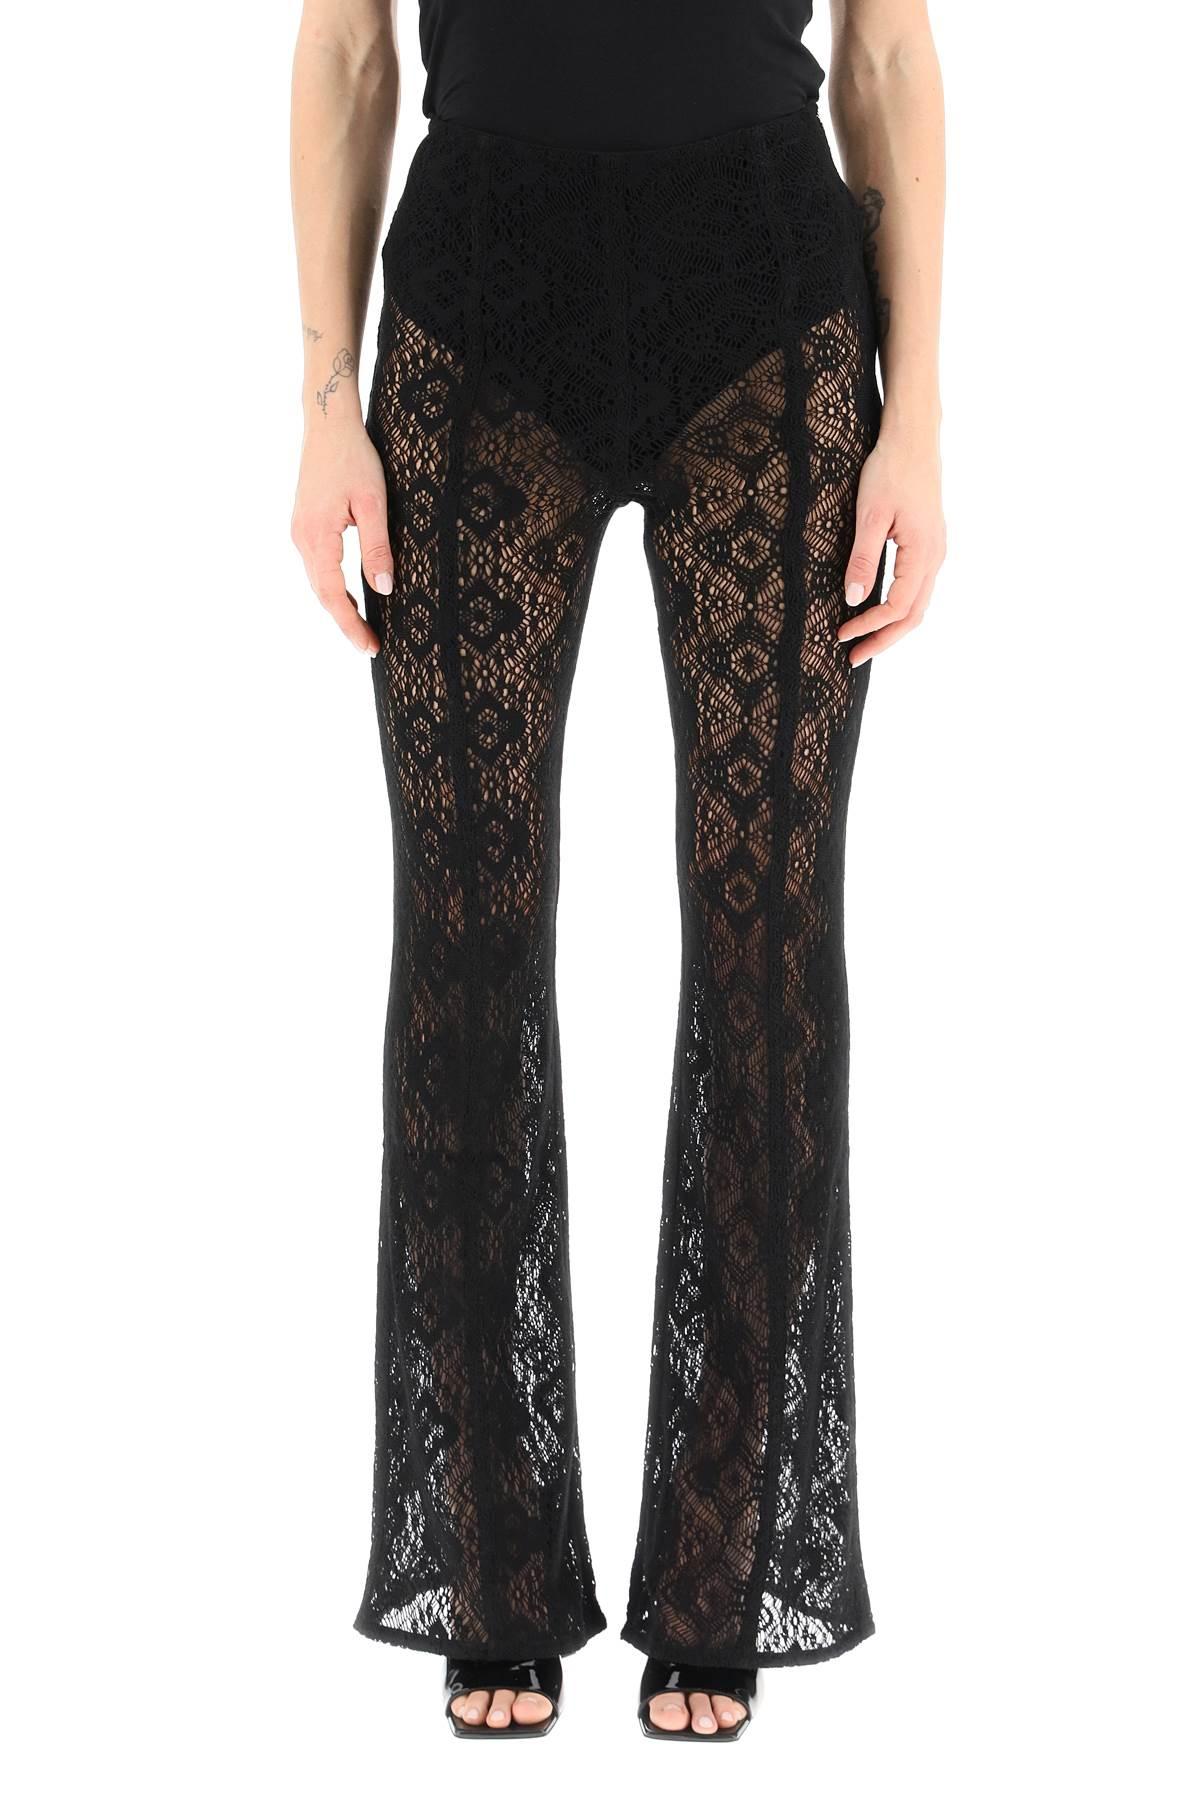 Ganni Flared Lace Pants in Black | Lyst